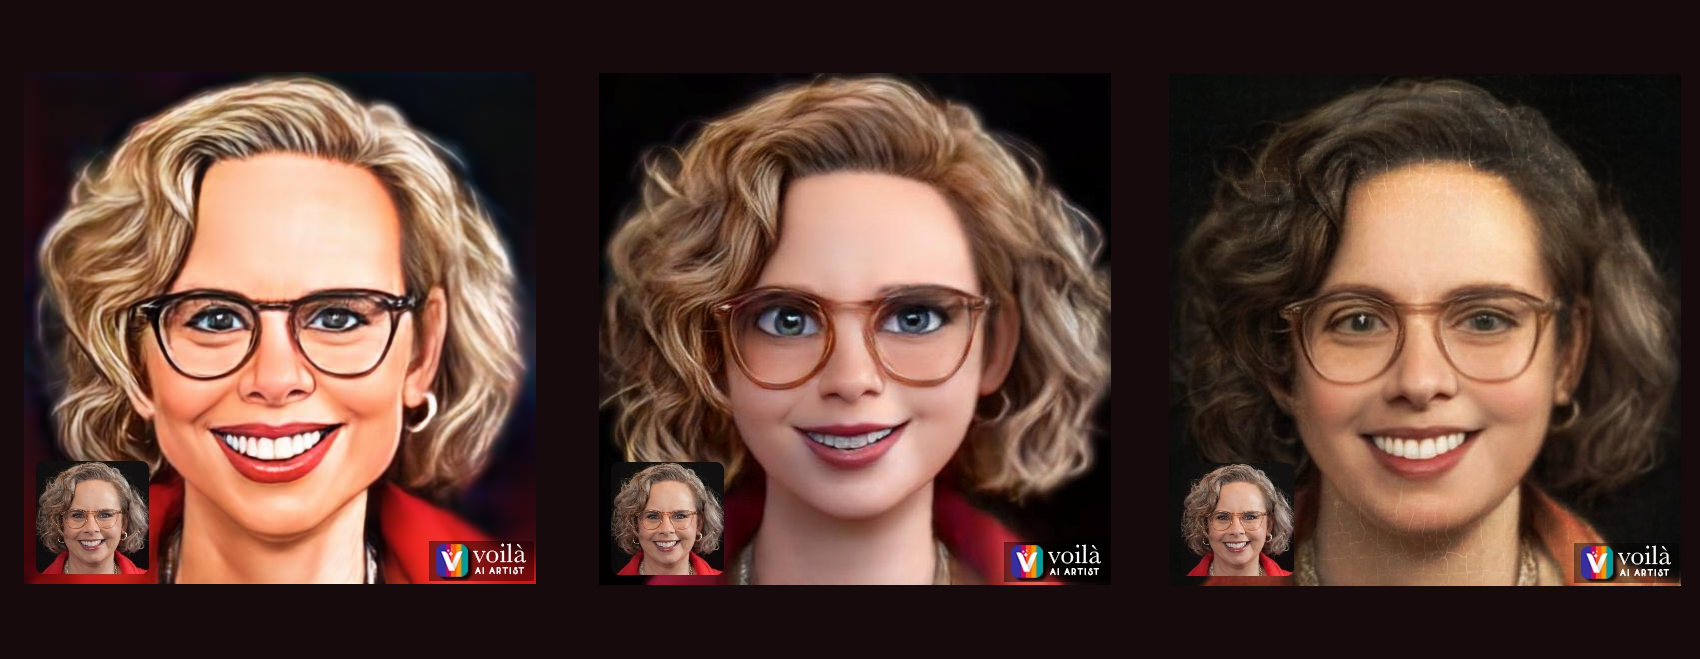 3 versions of Laura Solomon done by the Voila Ai app